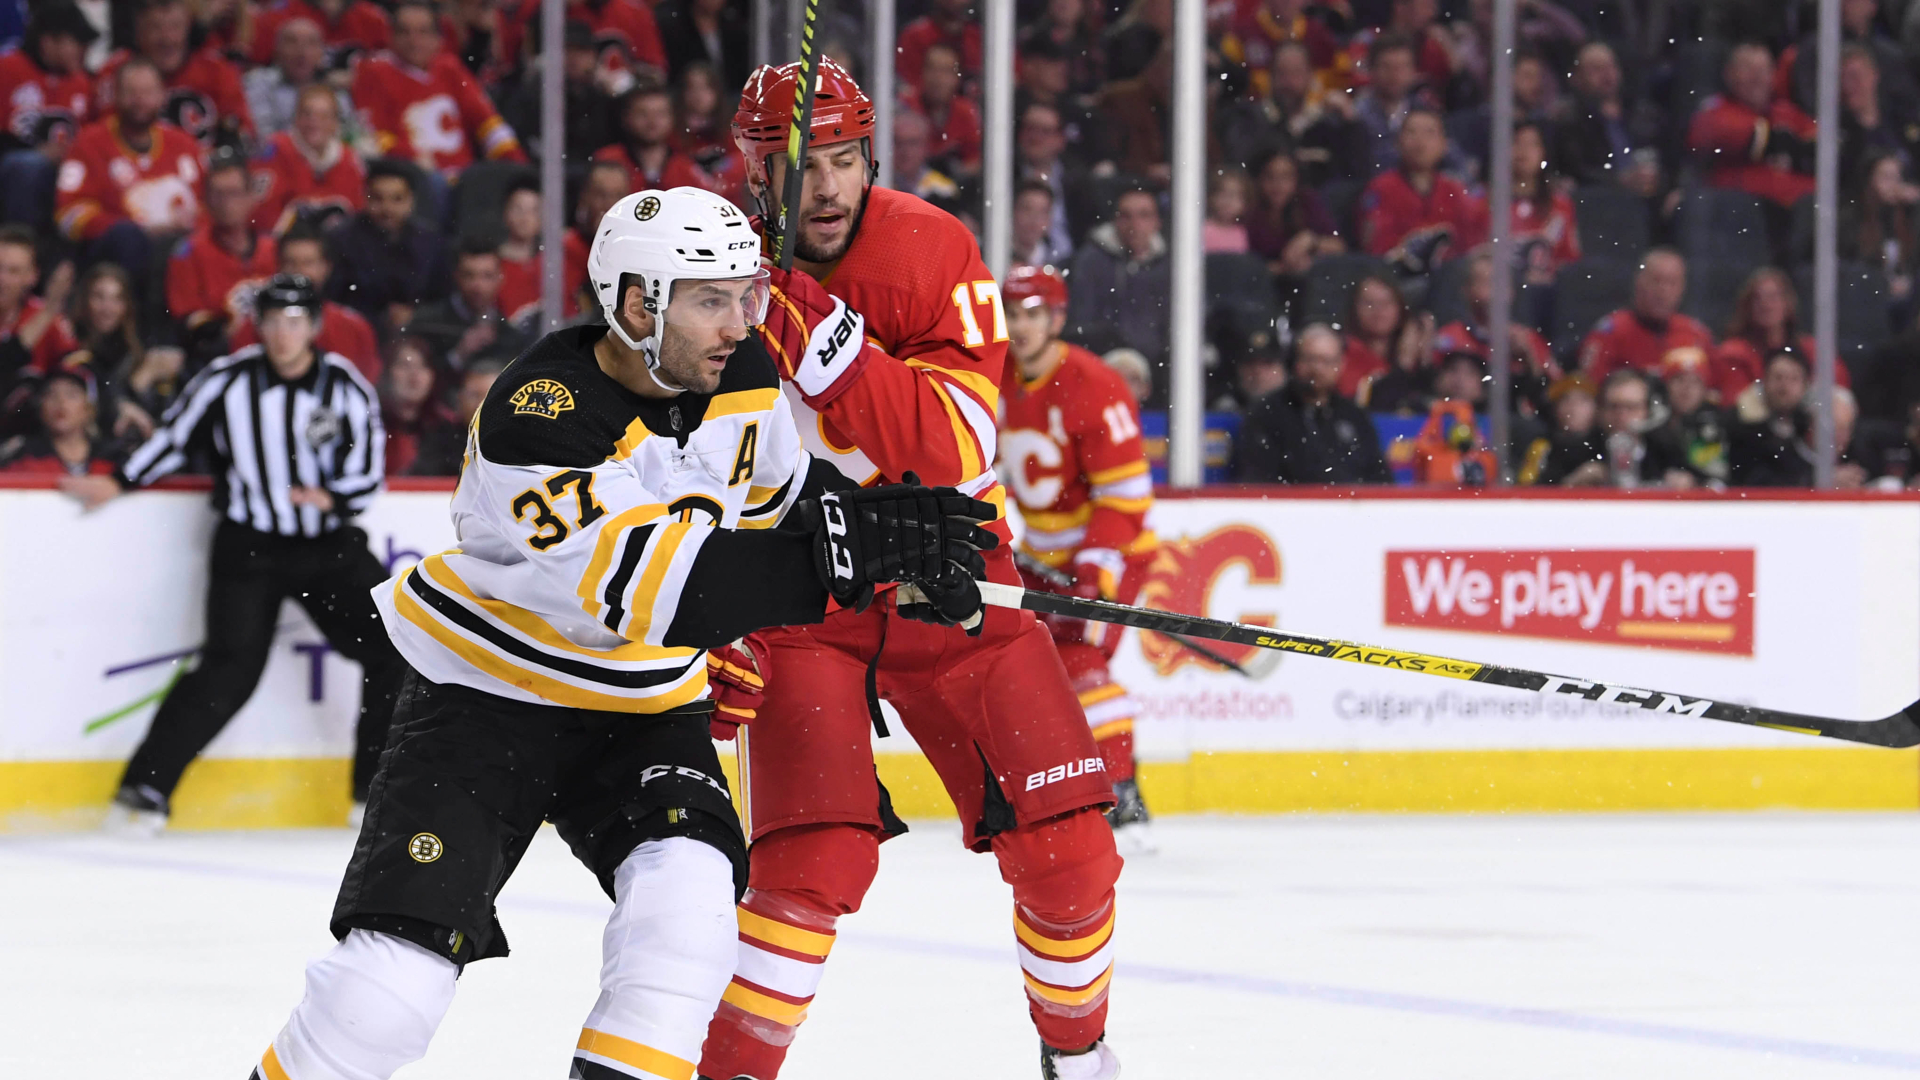 Milan Lucic Returns to Bruins on 1-Year, $1 Million Deal